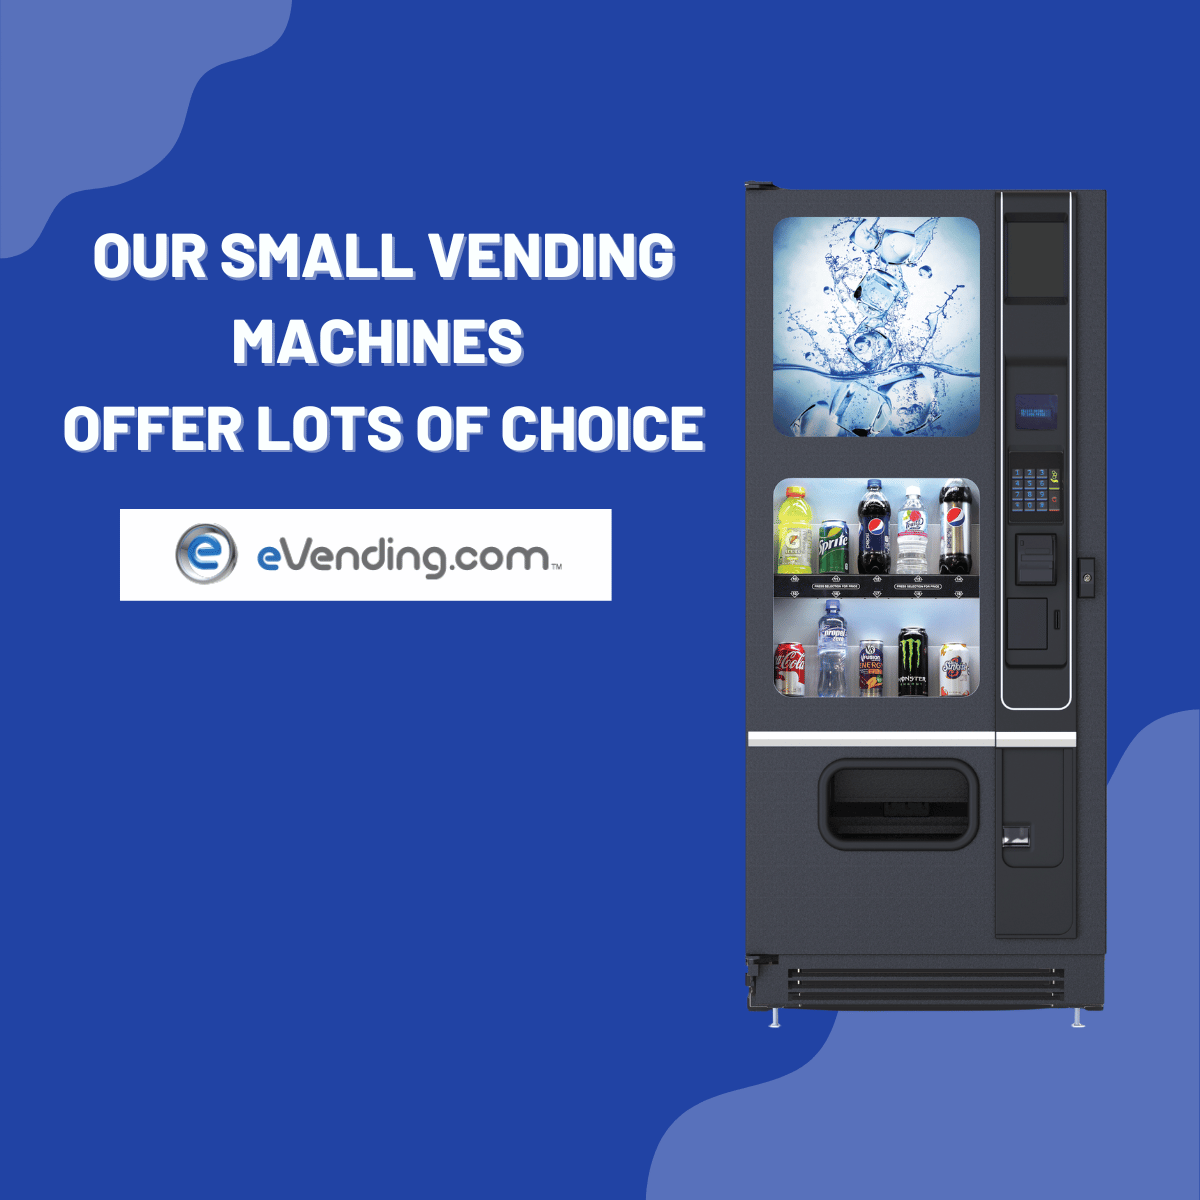 YOUR CUSTOMERS MIGHT APPRECIATE SMALL VENDING MACHINES